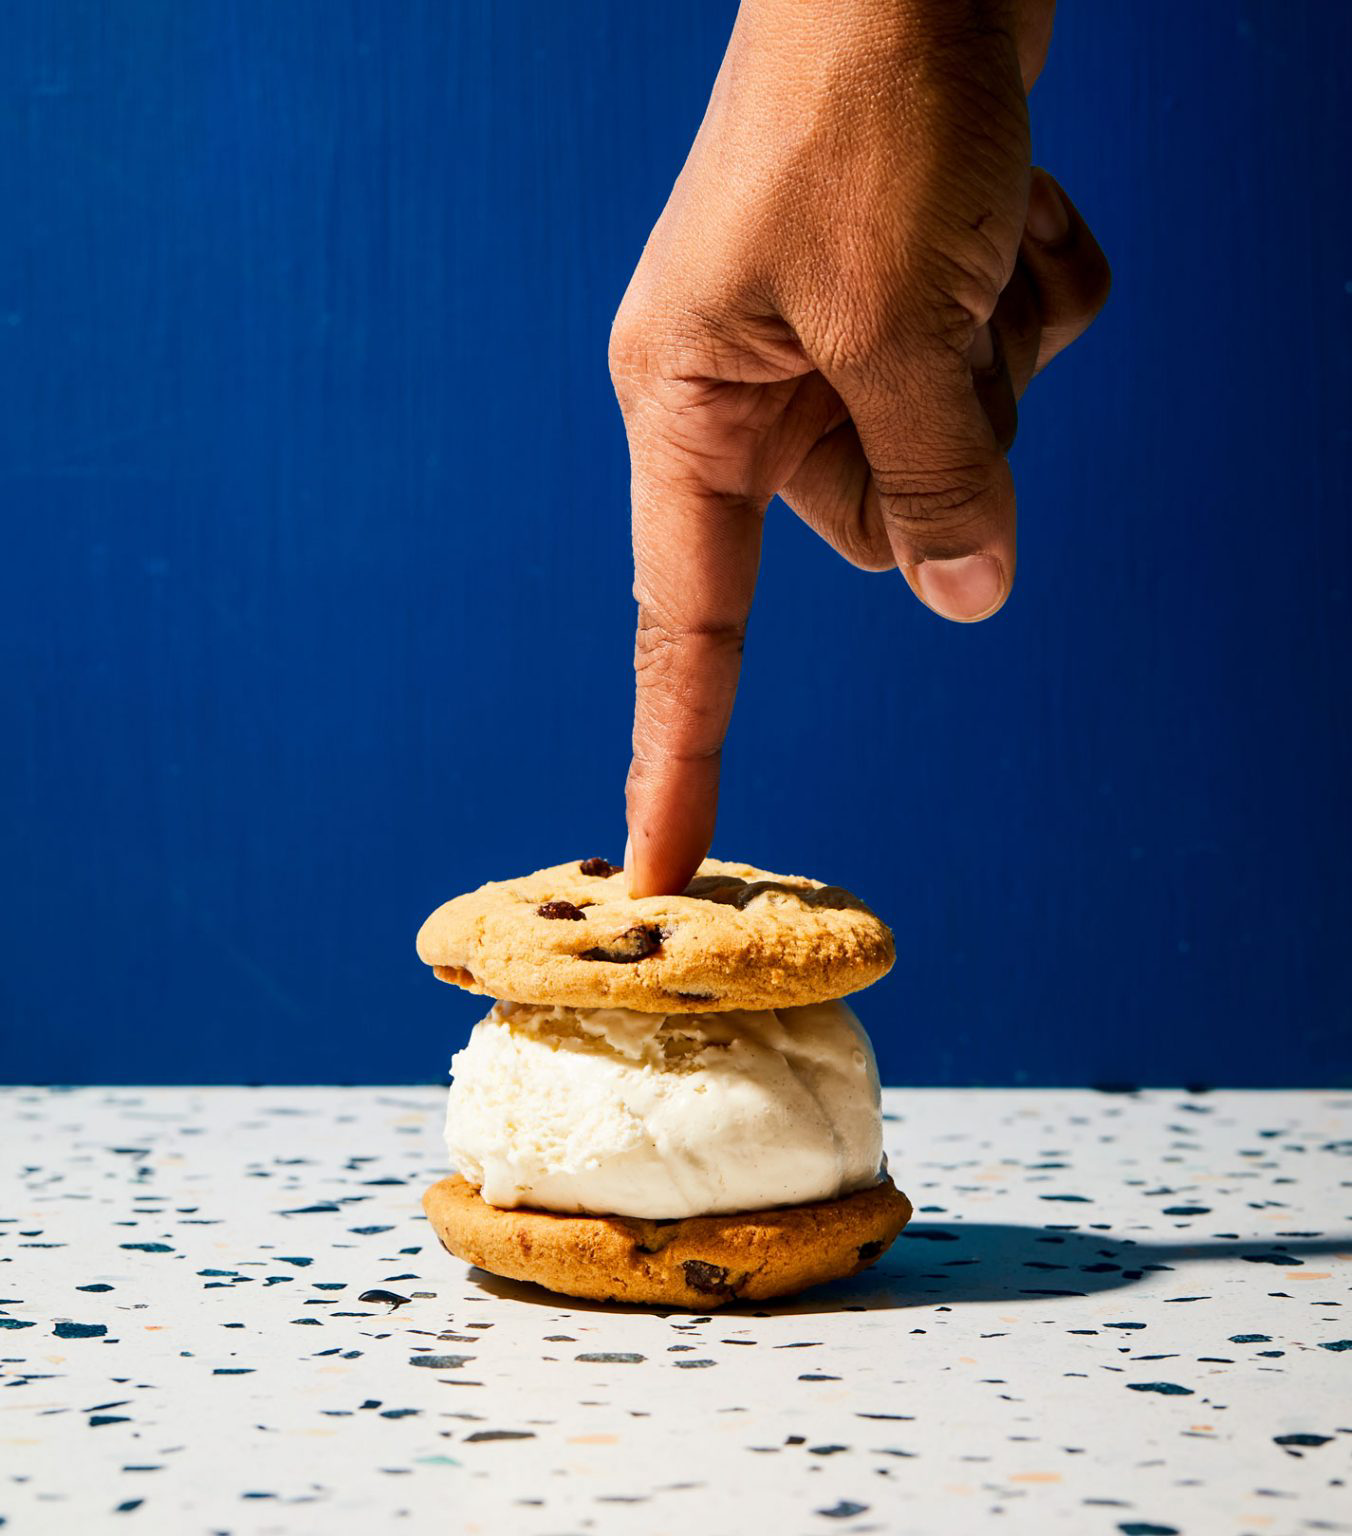 A person pressing on an ice cream sandwich.